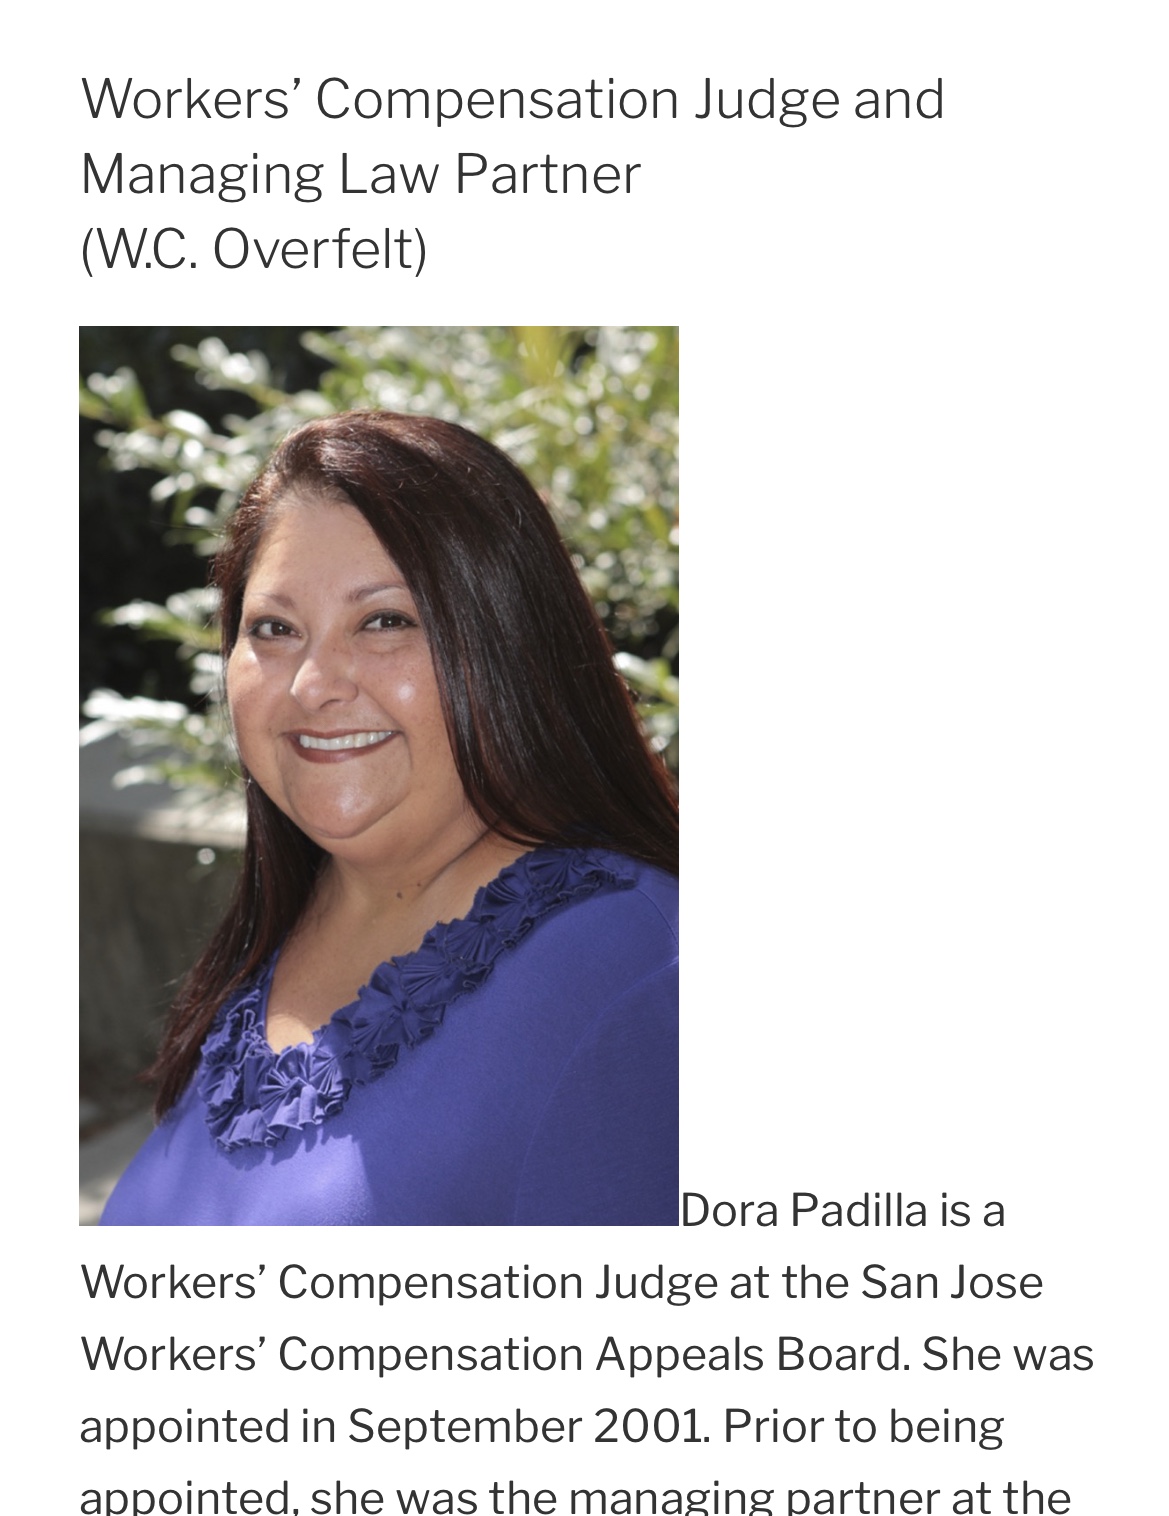 WORKERS COMP JUDGE DORA PADILLA ORDER TO PAY MARK